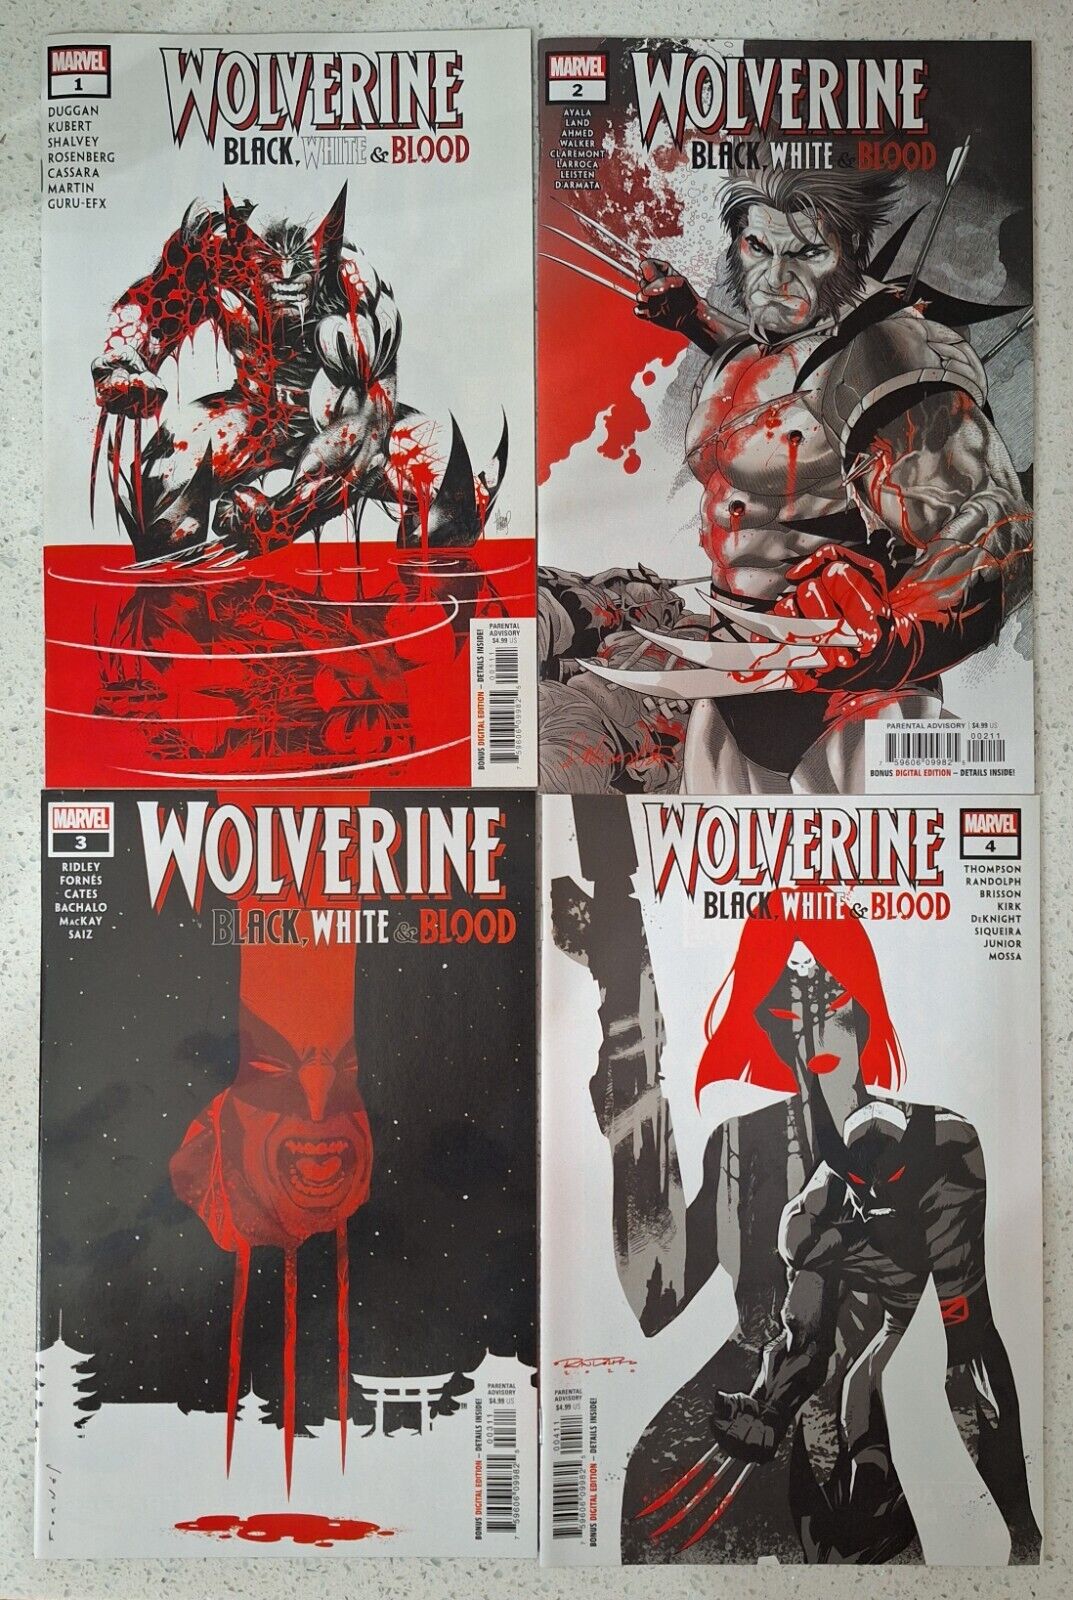 Marvel-Wolverine Black White and Blood #1-4 Complete Series-1st Prints